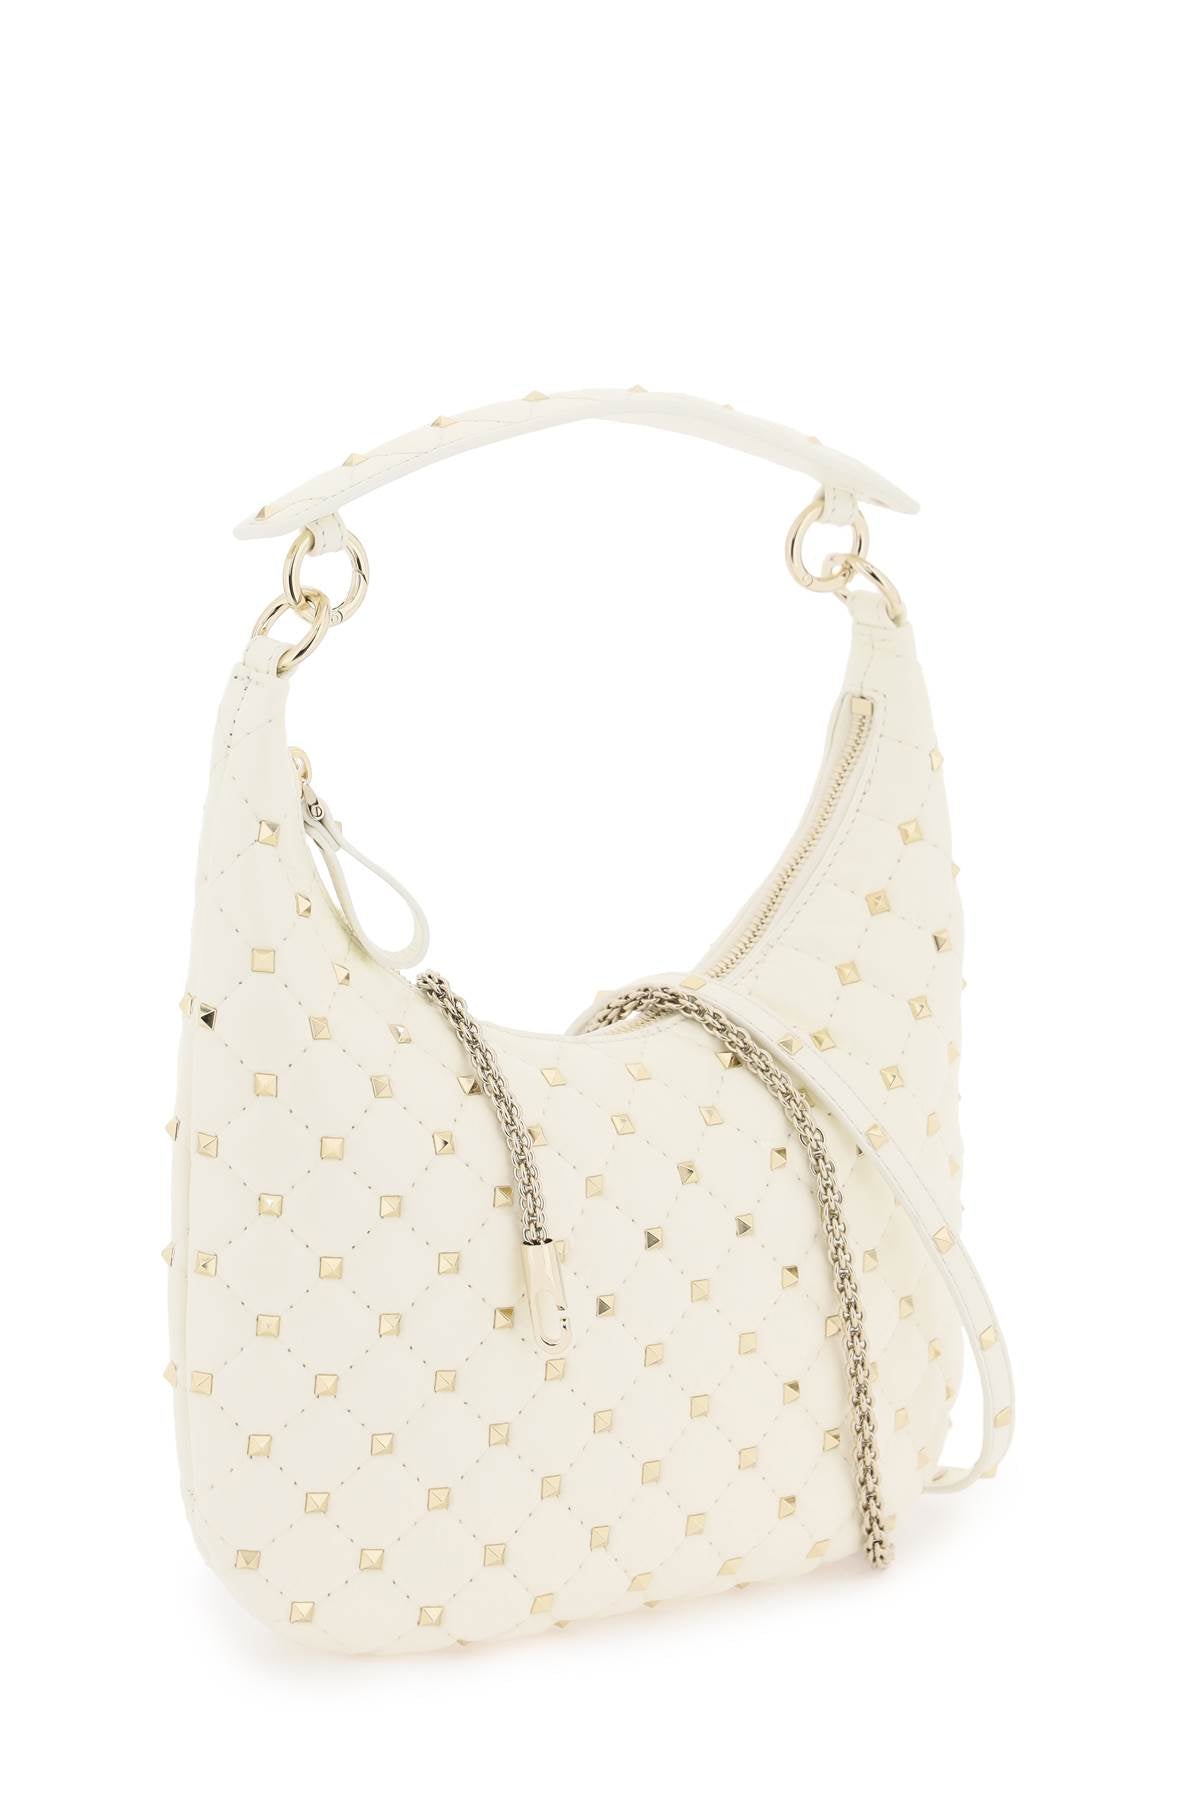 VALENTINO GARAVANI Small Quilted Leather Rockstud Spike Hobo Handbag with Convertible Straps in White